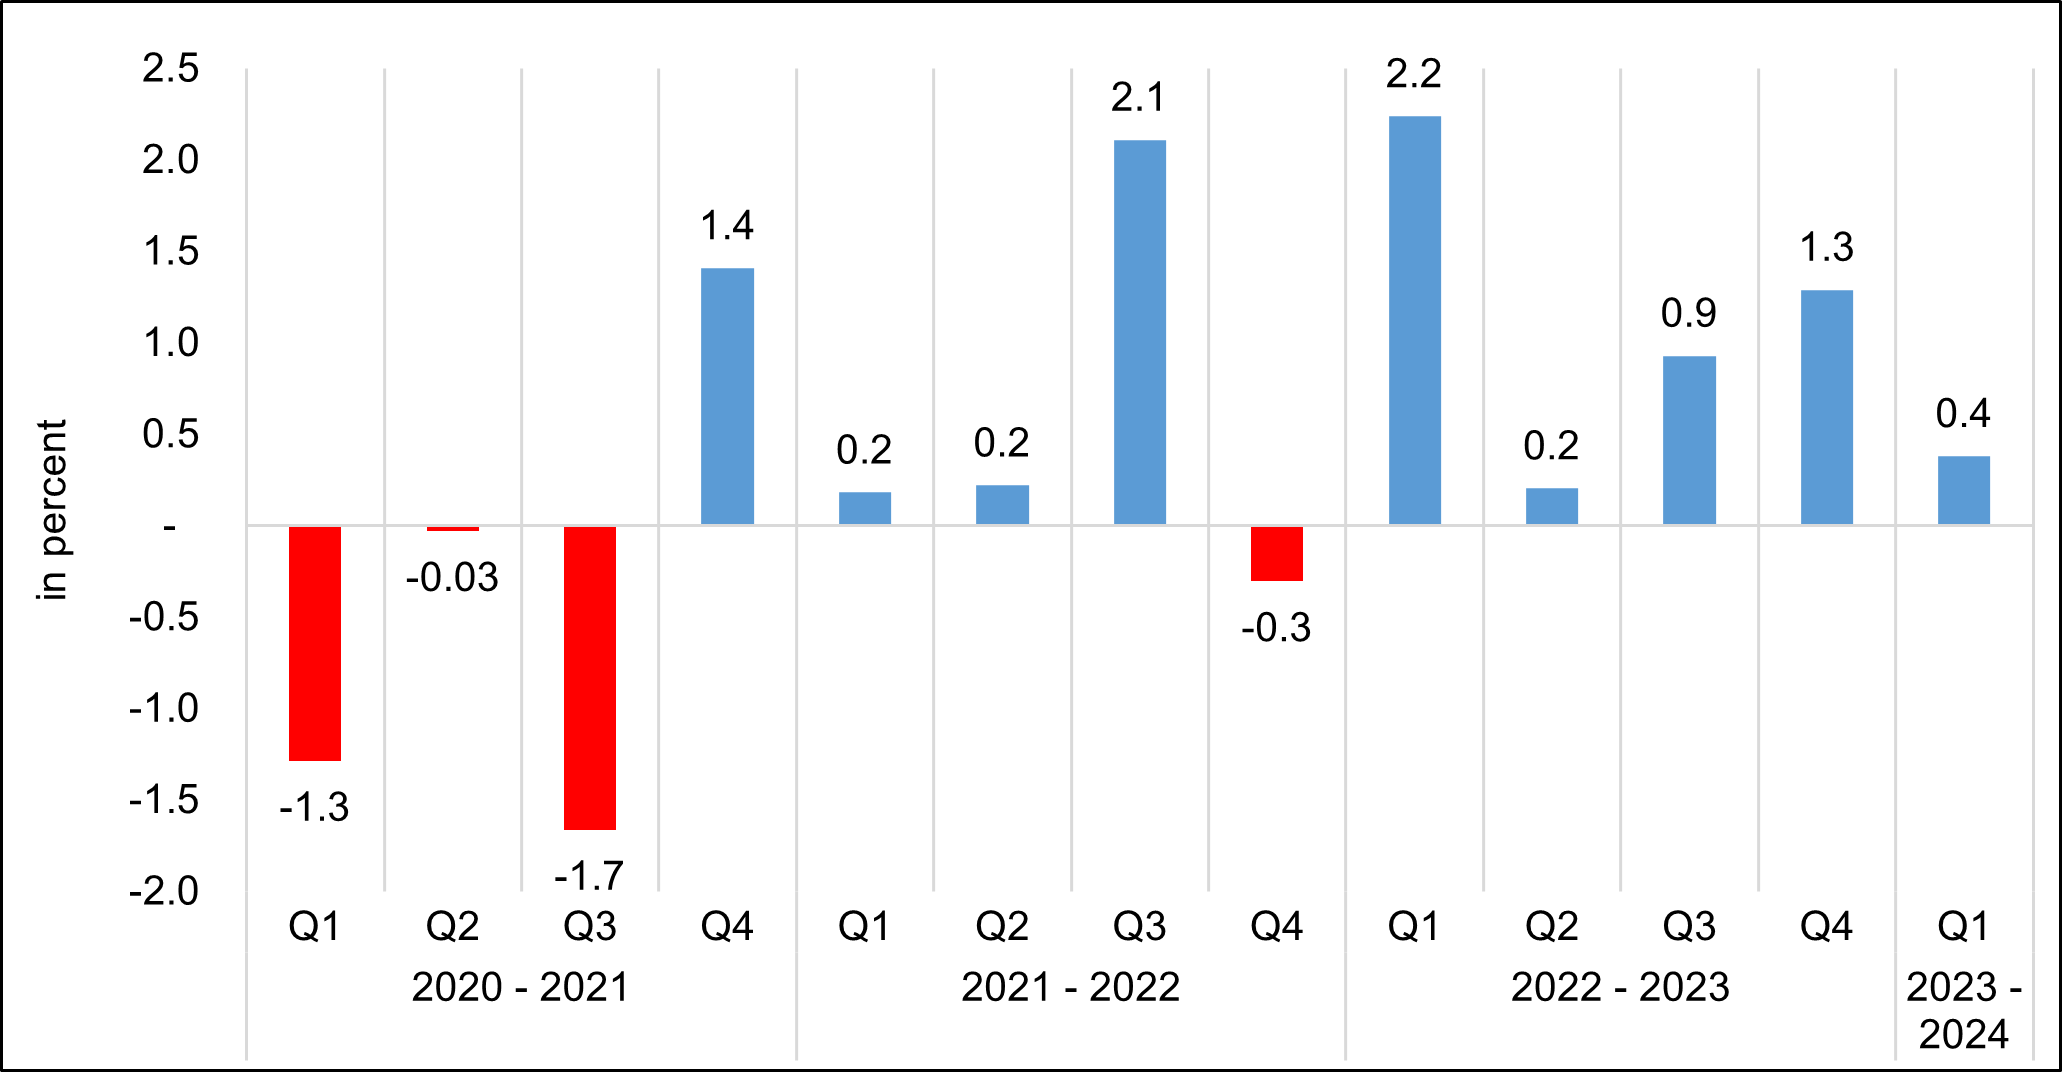 Figure 2. Agriculture, Forestry, and Fishing, Q1 2021 to Q1 2024 Growth Rates, At Constant 2018 Prices